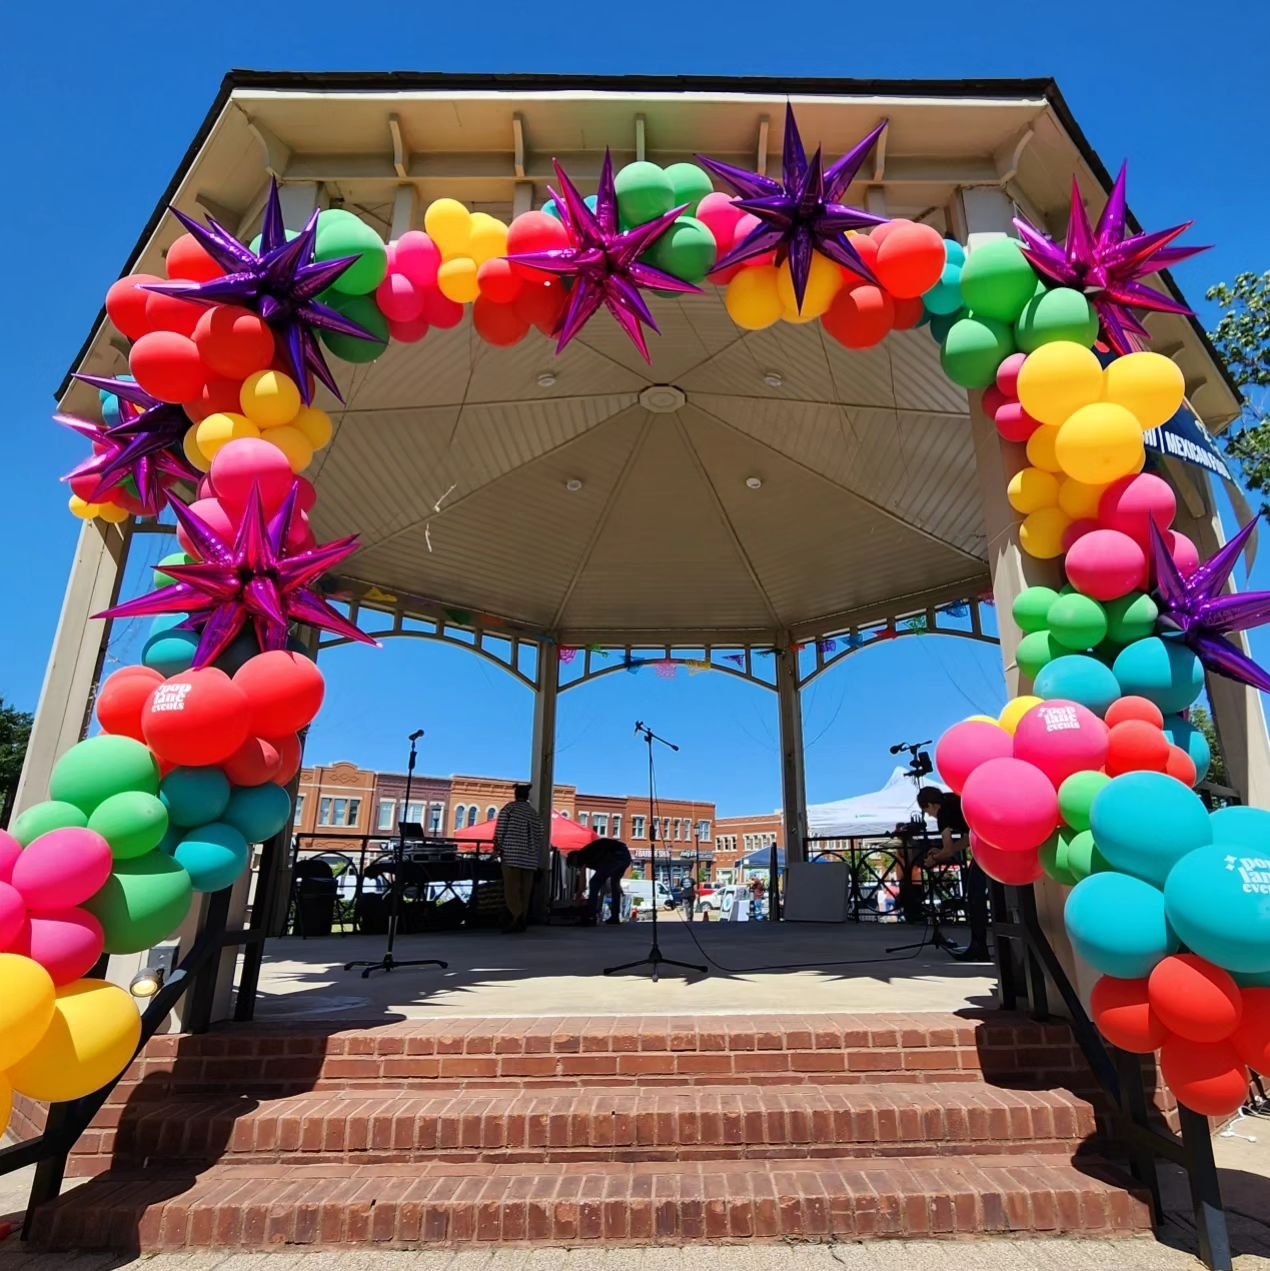 Are you interested in a design of this scale for your Cinco de Mayo celebration?
Head over to our website and fill out our inquiry form, and select BALLOON GARLAND as your design choice! We'll take care of the rest.
If you have questions, call us at 